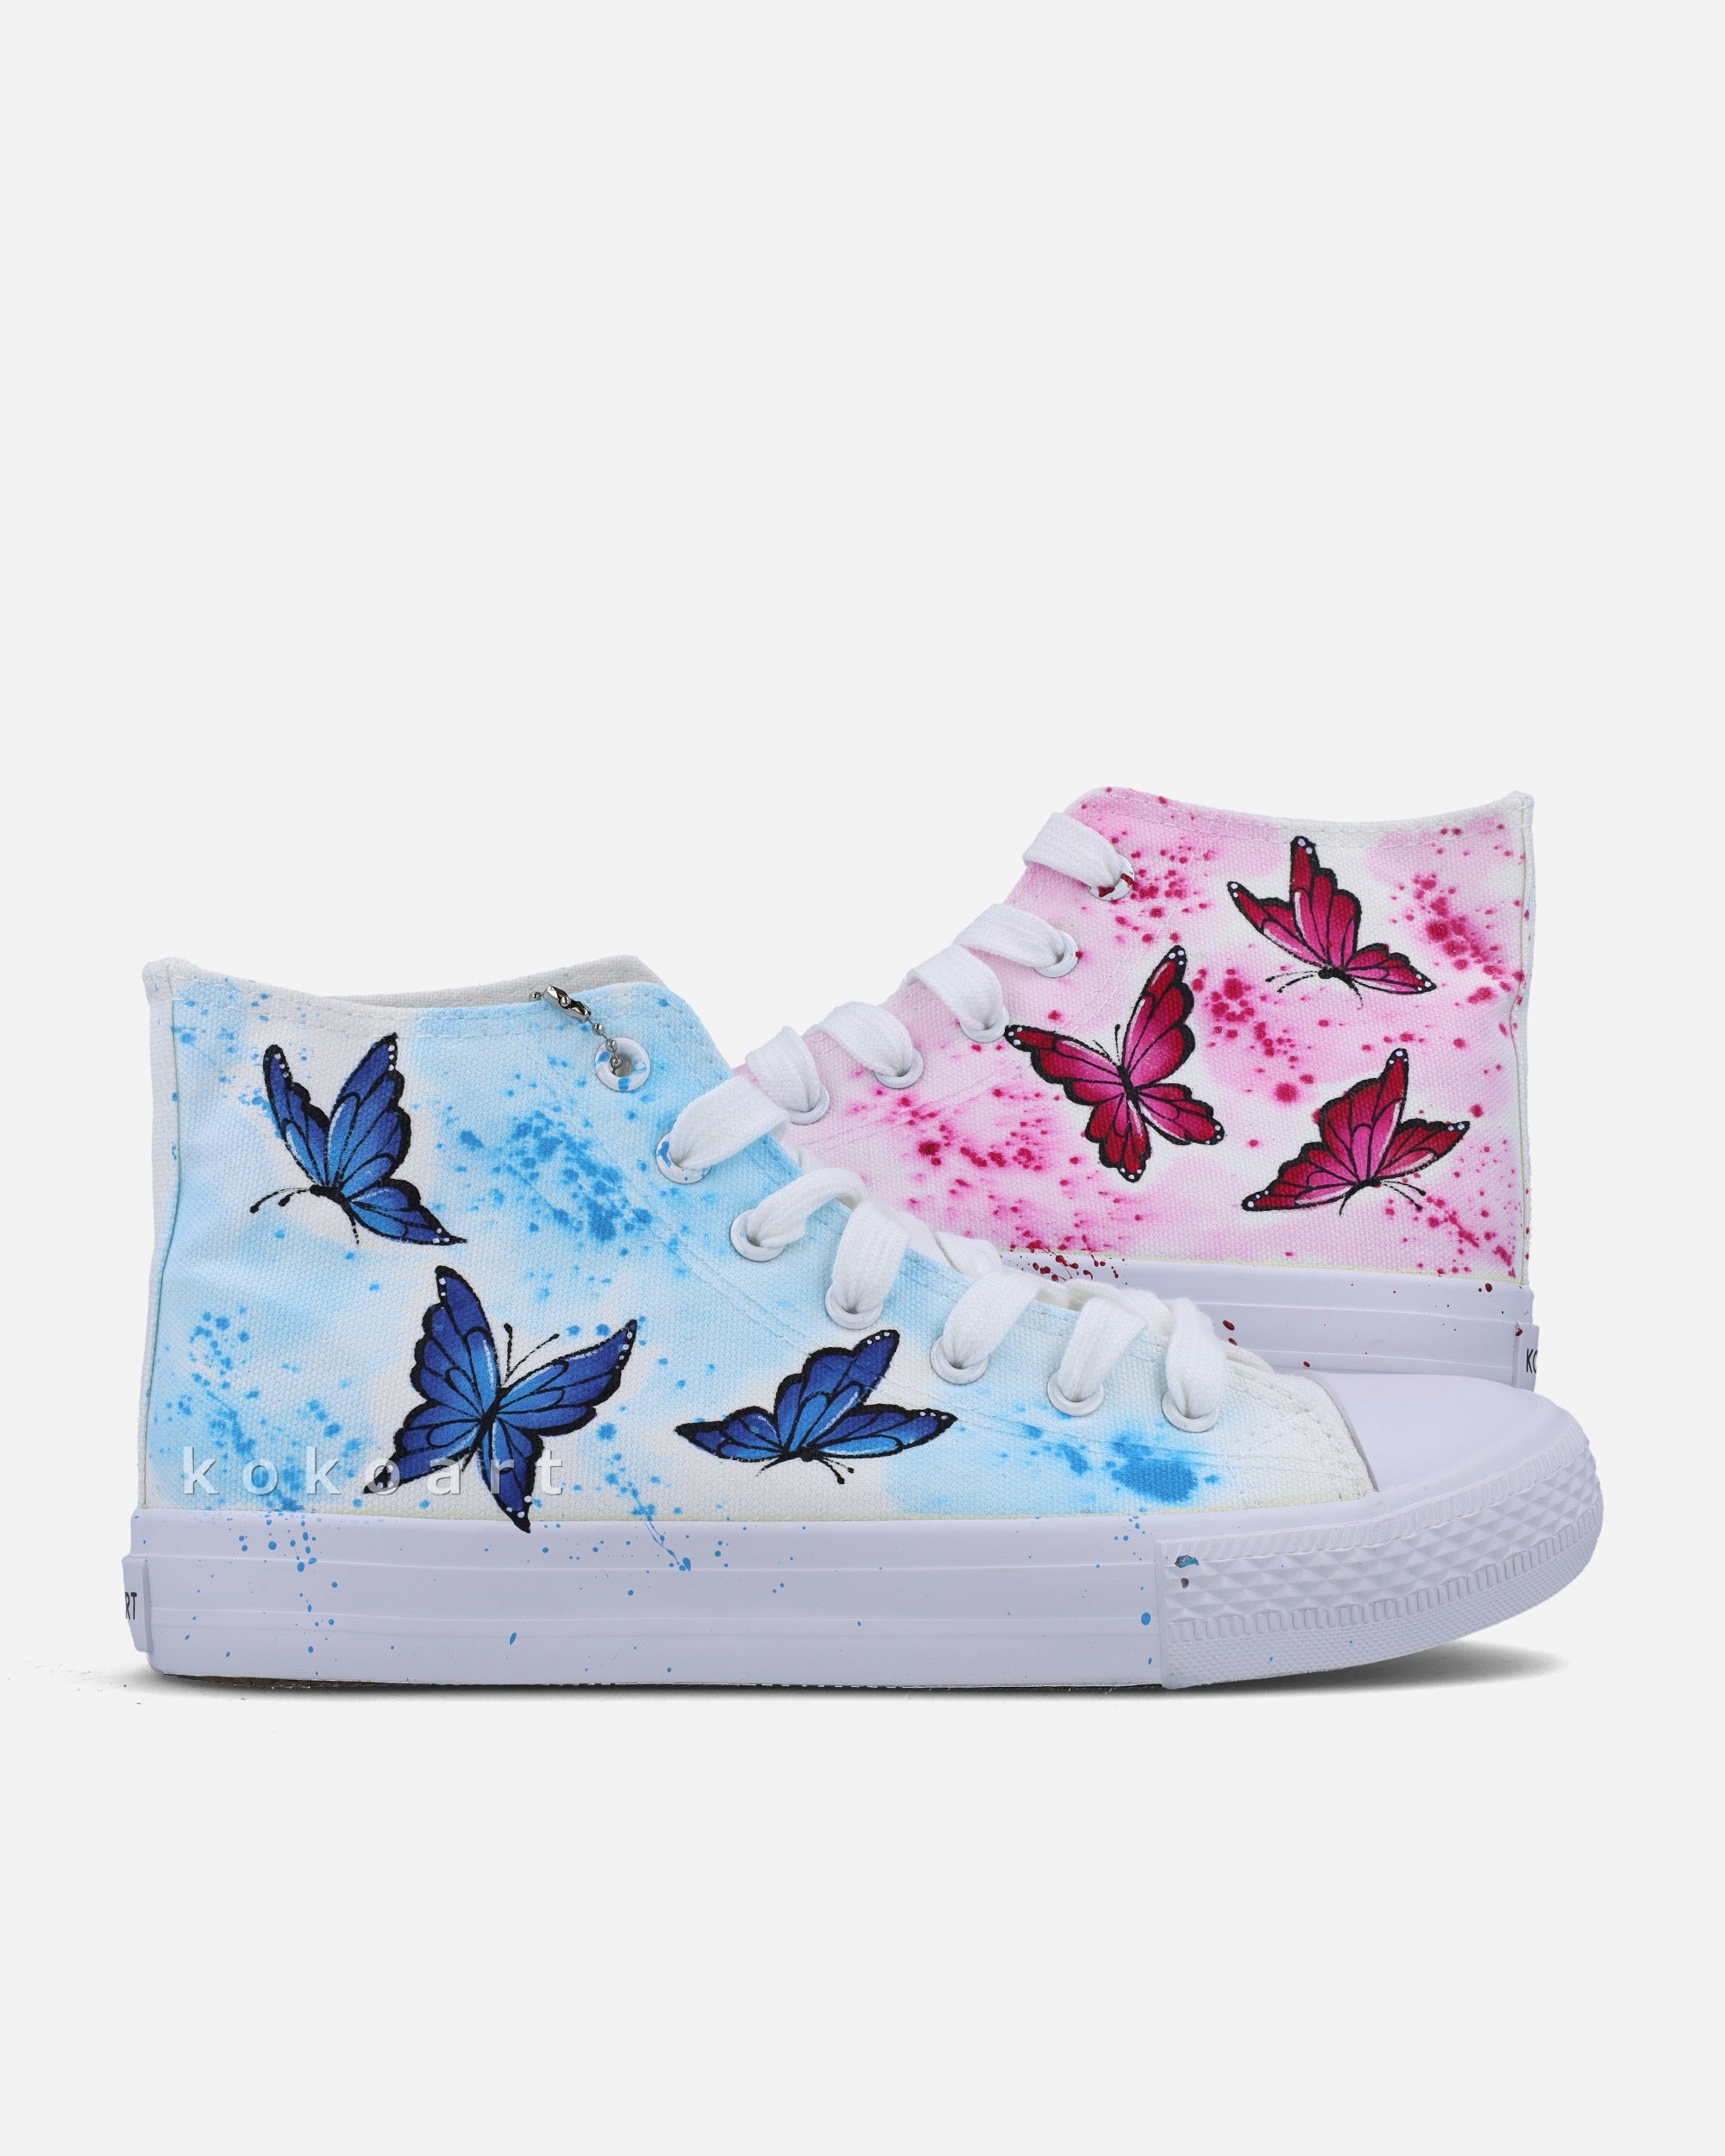 Pink and Blue Watercolour Butterflies Hand Painted Shoes